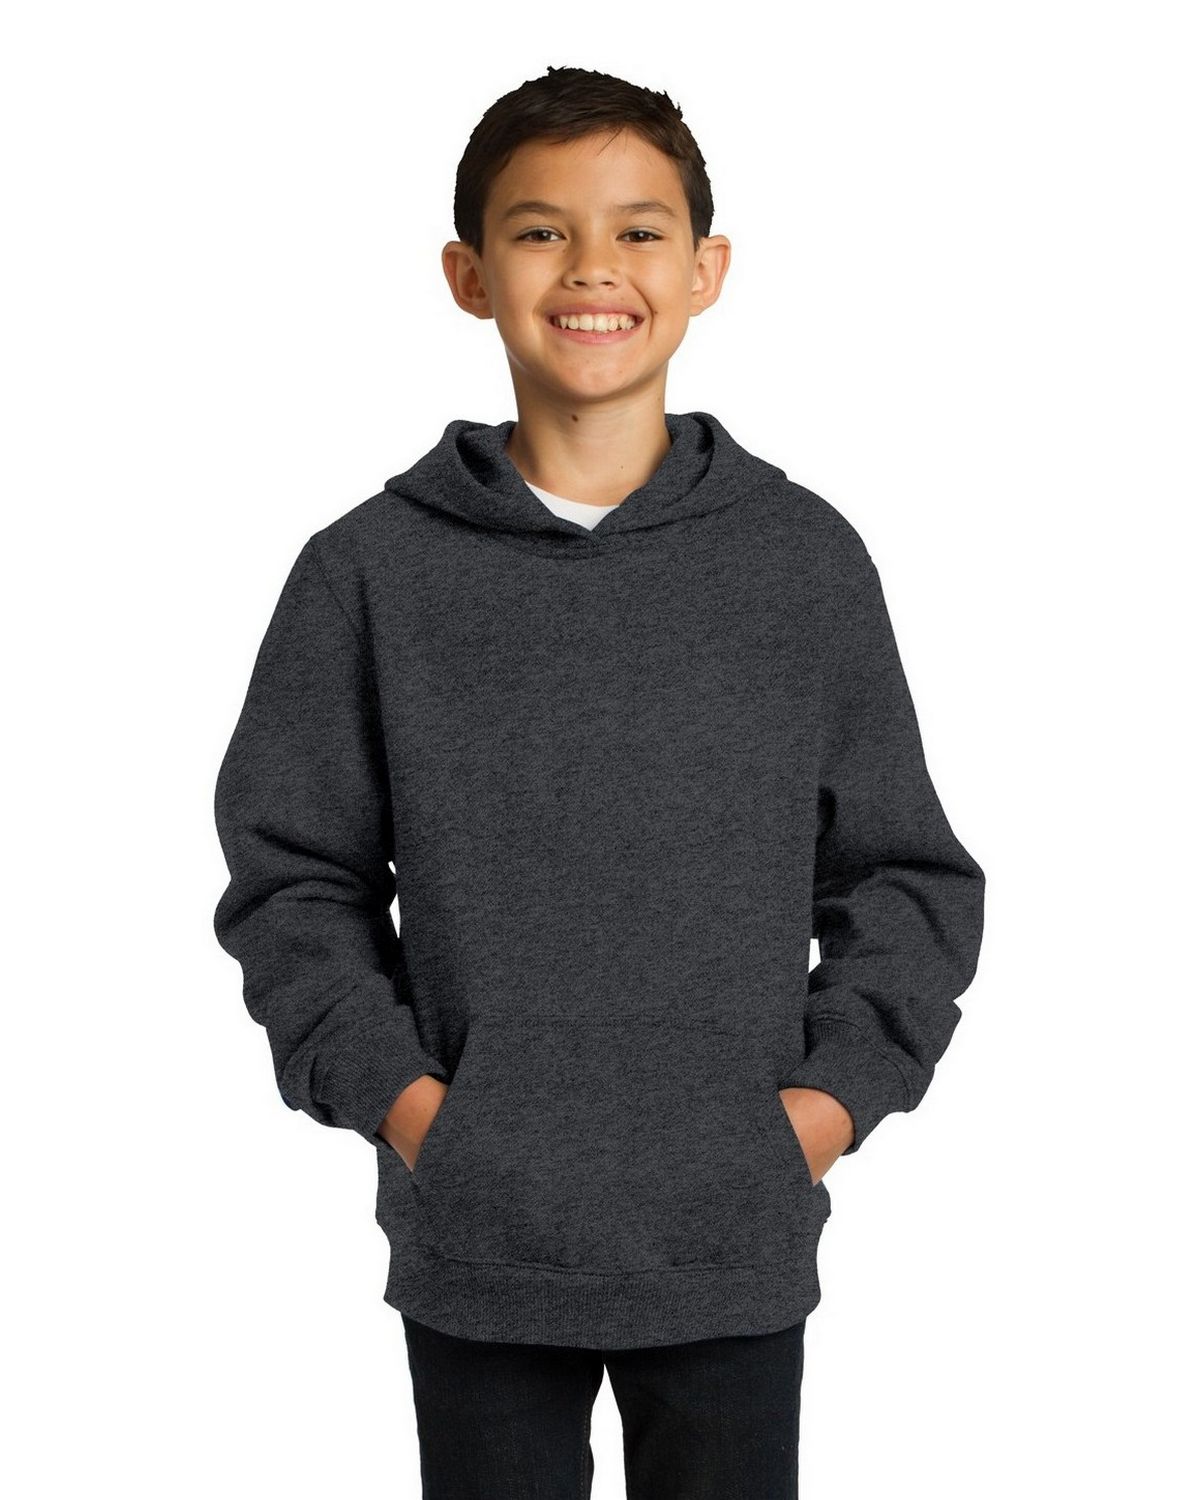 Sport-Tek YST254 Youth Pullover Hooded Sweatshirt by Port Authority ...